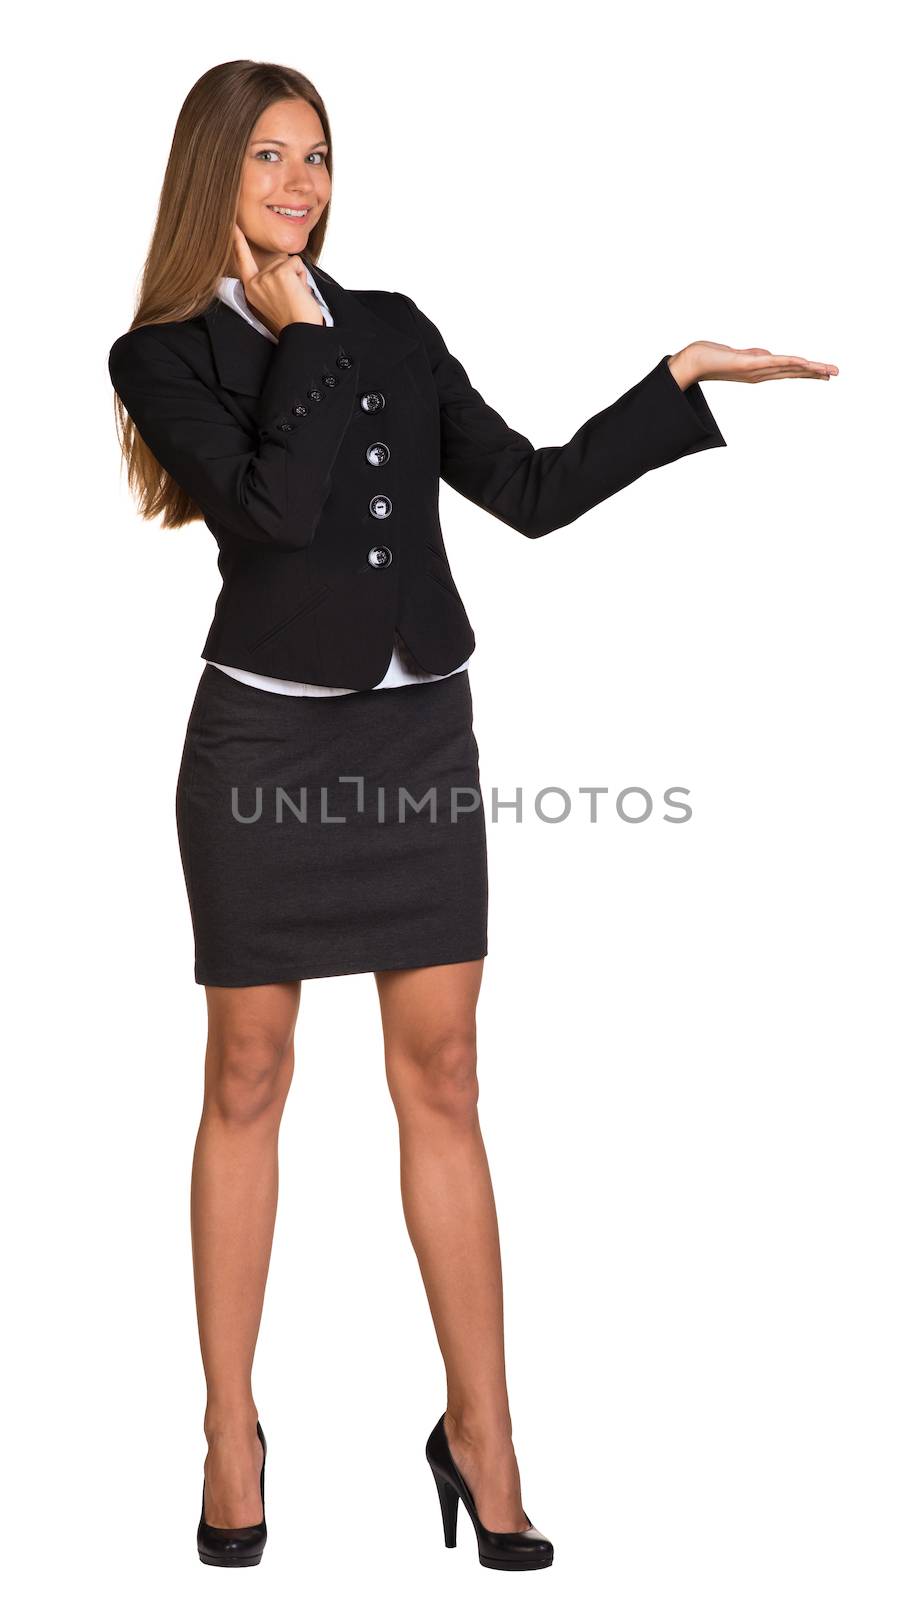 Businesswoman holding anything. Isolated on white background